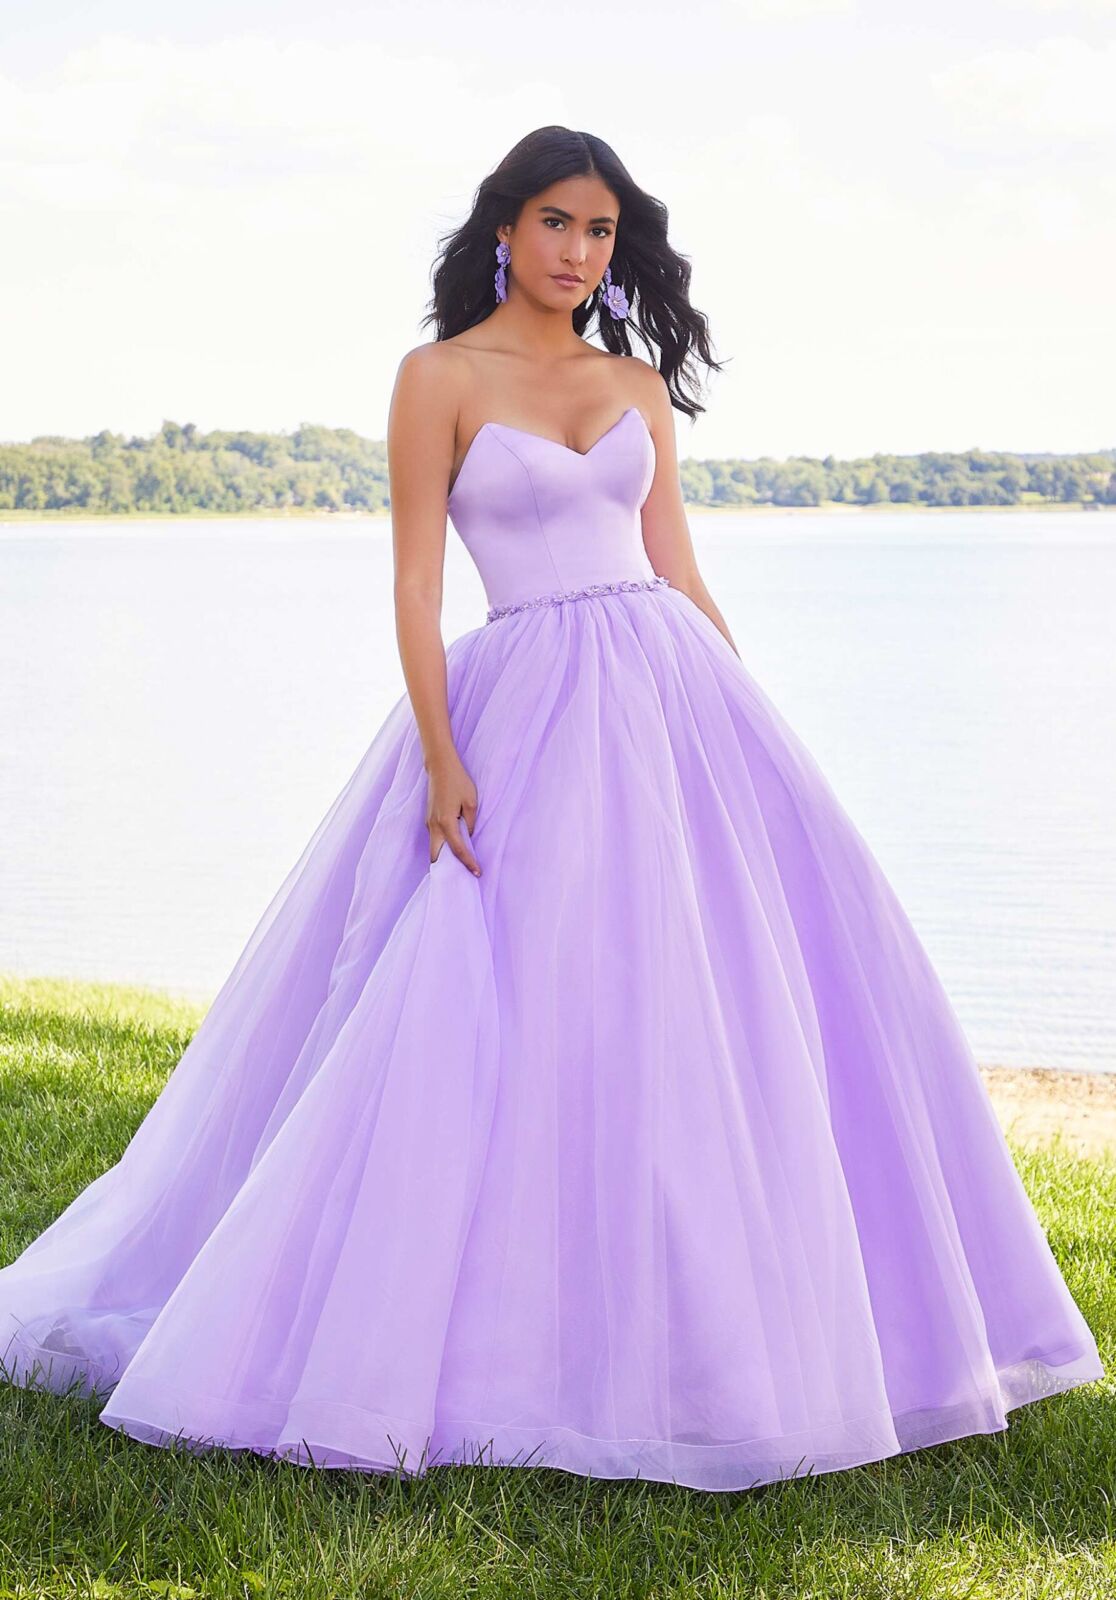 Light Lavender Net Ballgown Embellished With Moti, Sequin, Cut Dana, A